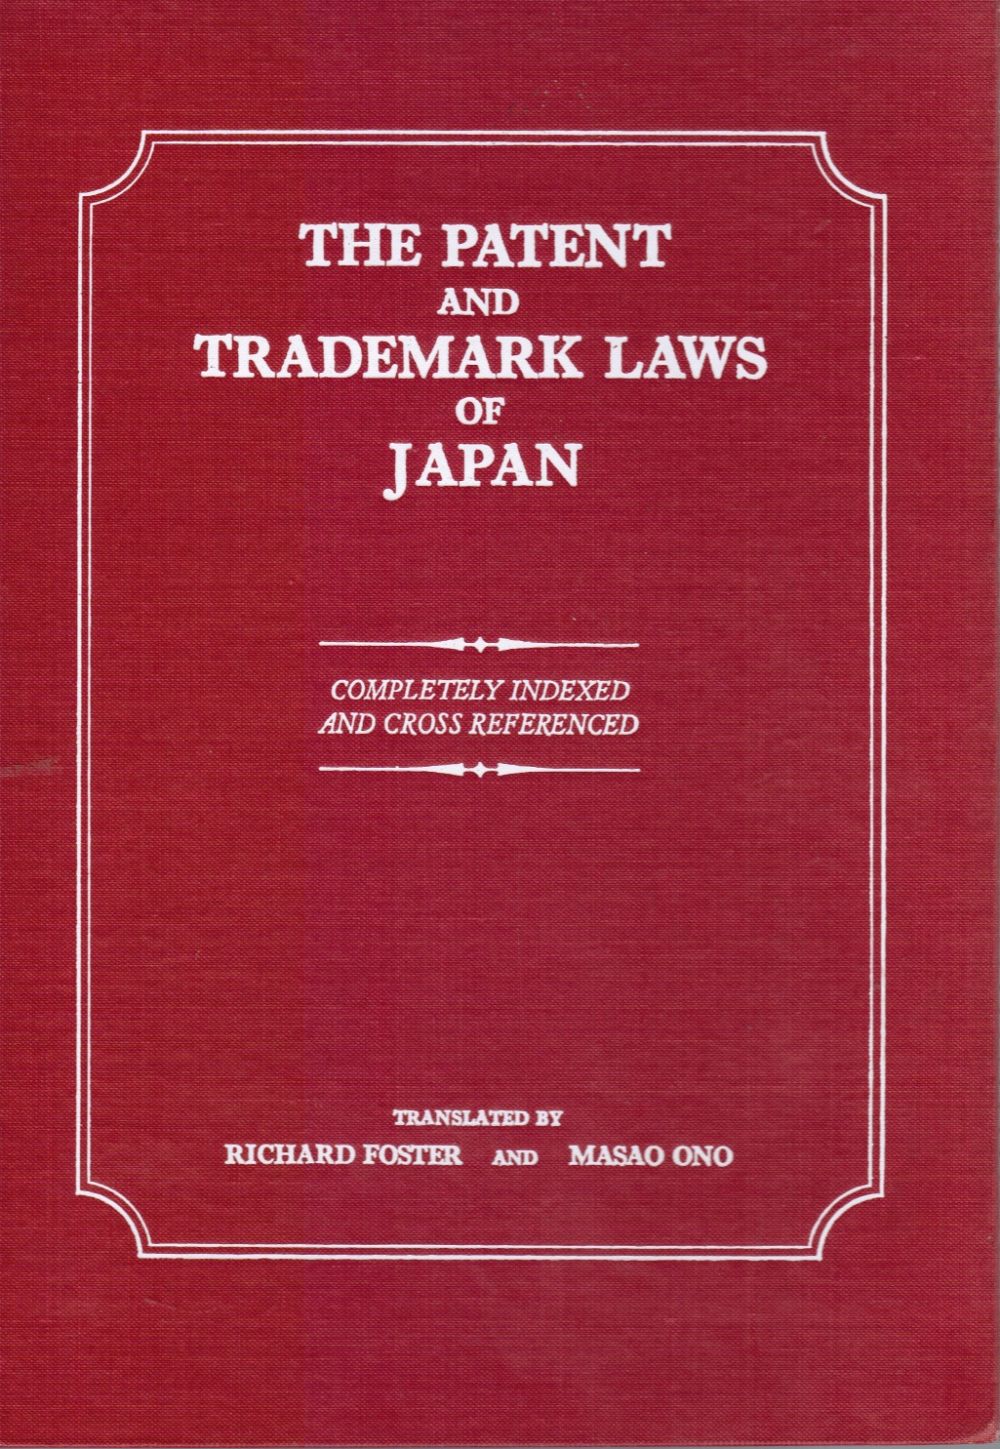 FOSTER, RICHARD; MASAO ONO (TRANSLATORS) - The Patent and Trademark Laws of Japan Completely Indexed and Cross Referenced